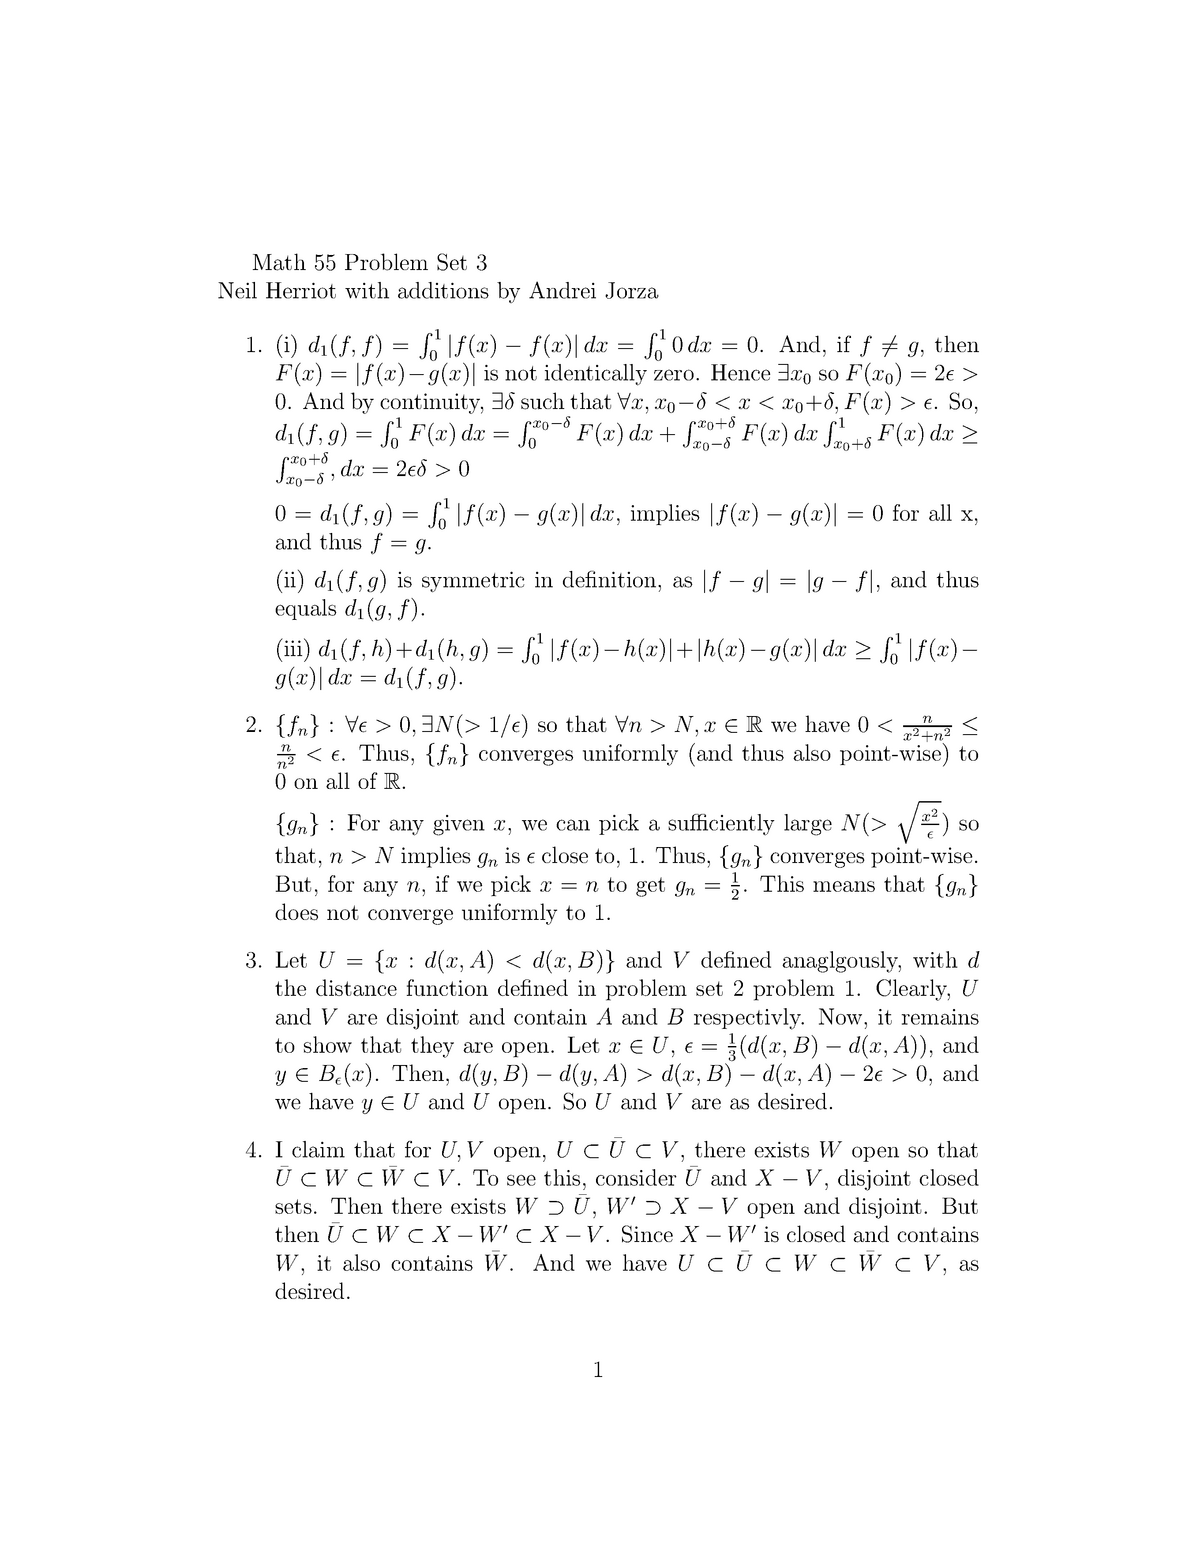 Sol3 Solution for Ass3 Math 55 Problem Set 3 Neil Herriot with